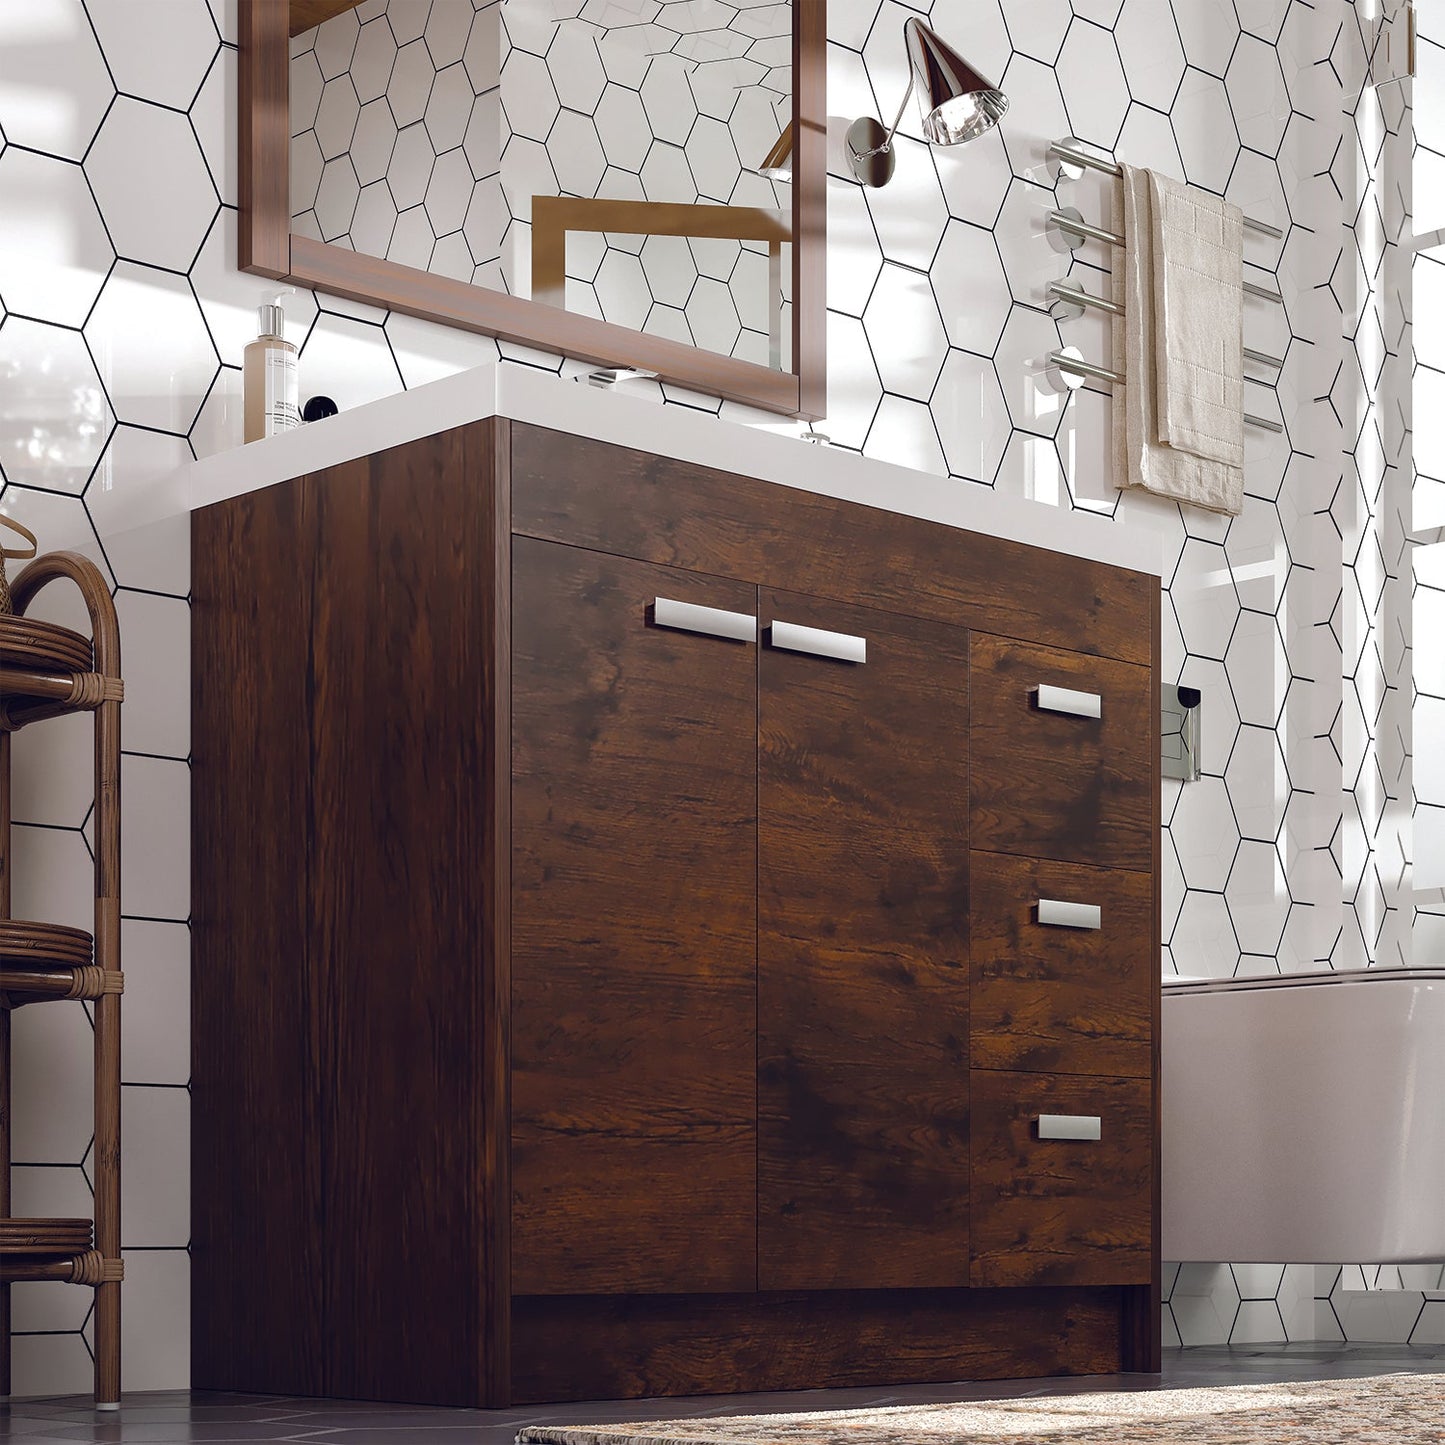 Lugano 36"W x 20" D Rosewood Bathroom Vanity with Acrylic Countertop and Integrated Sink